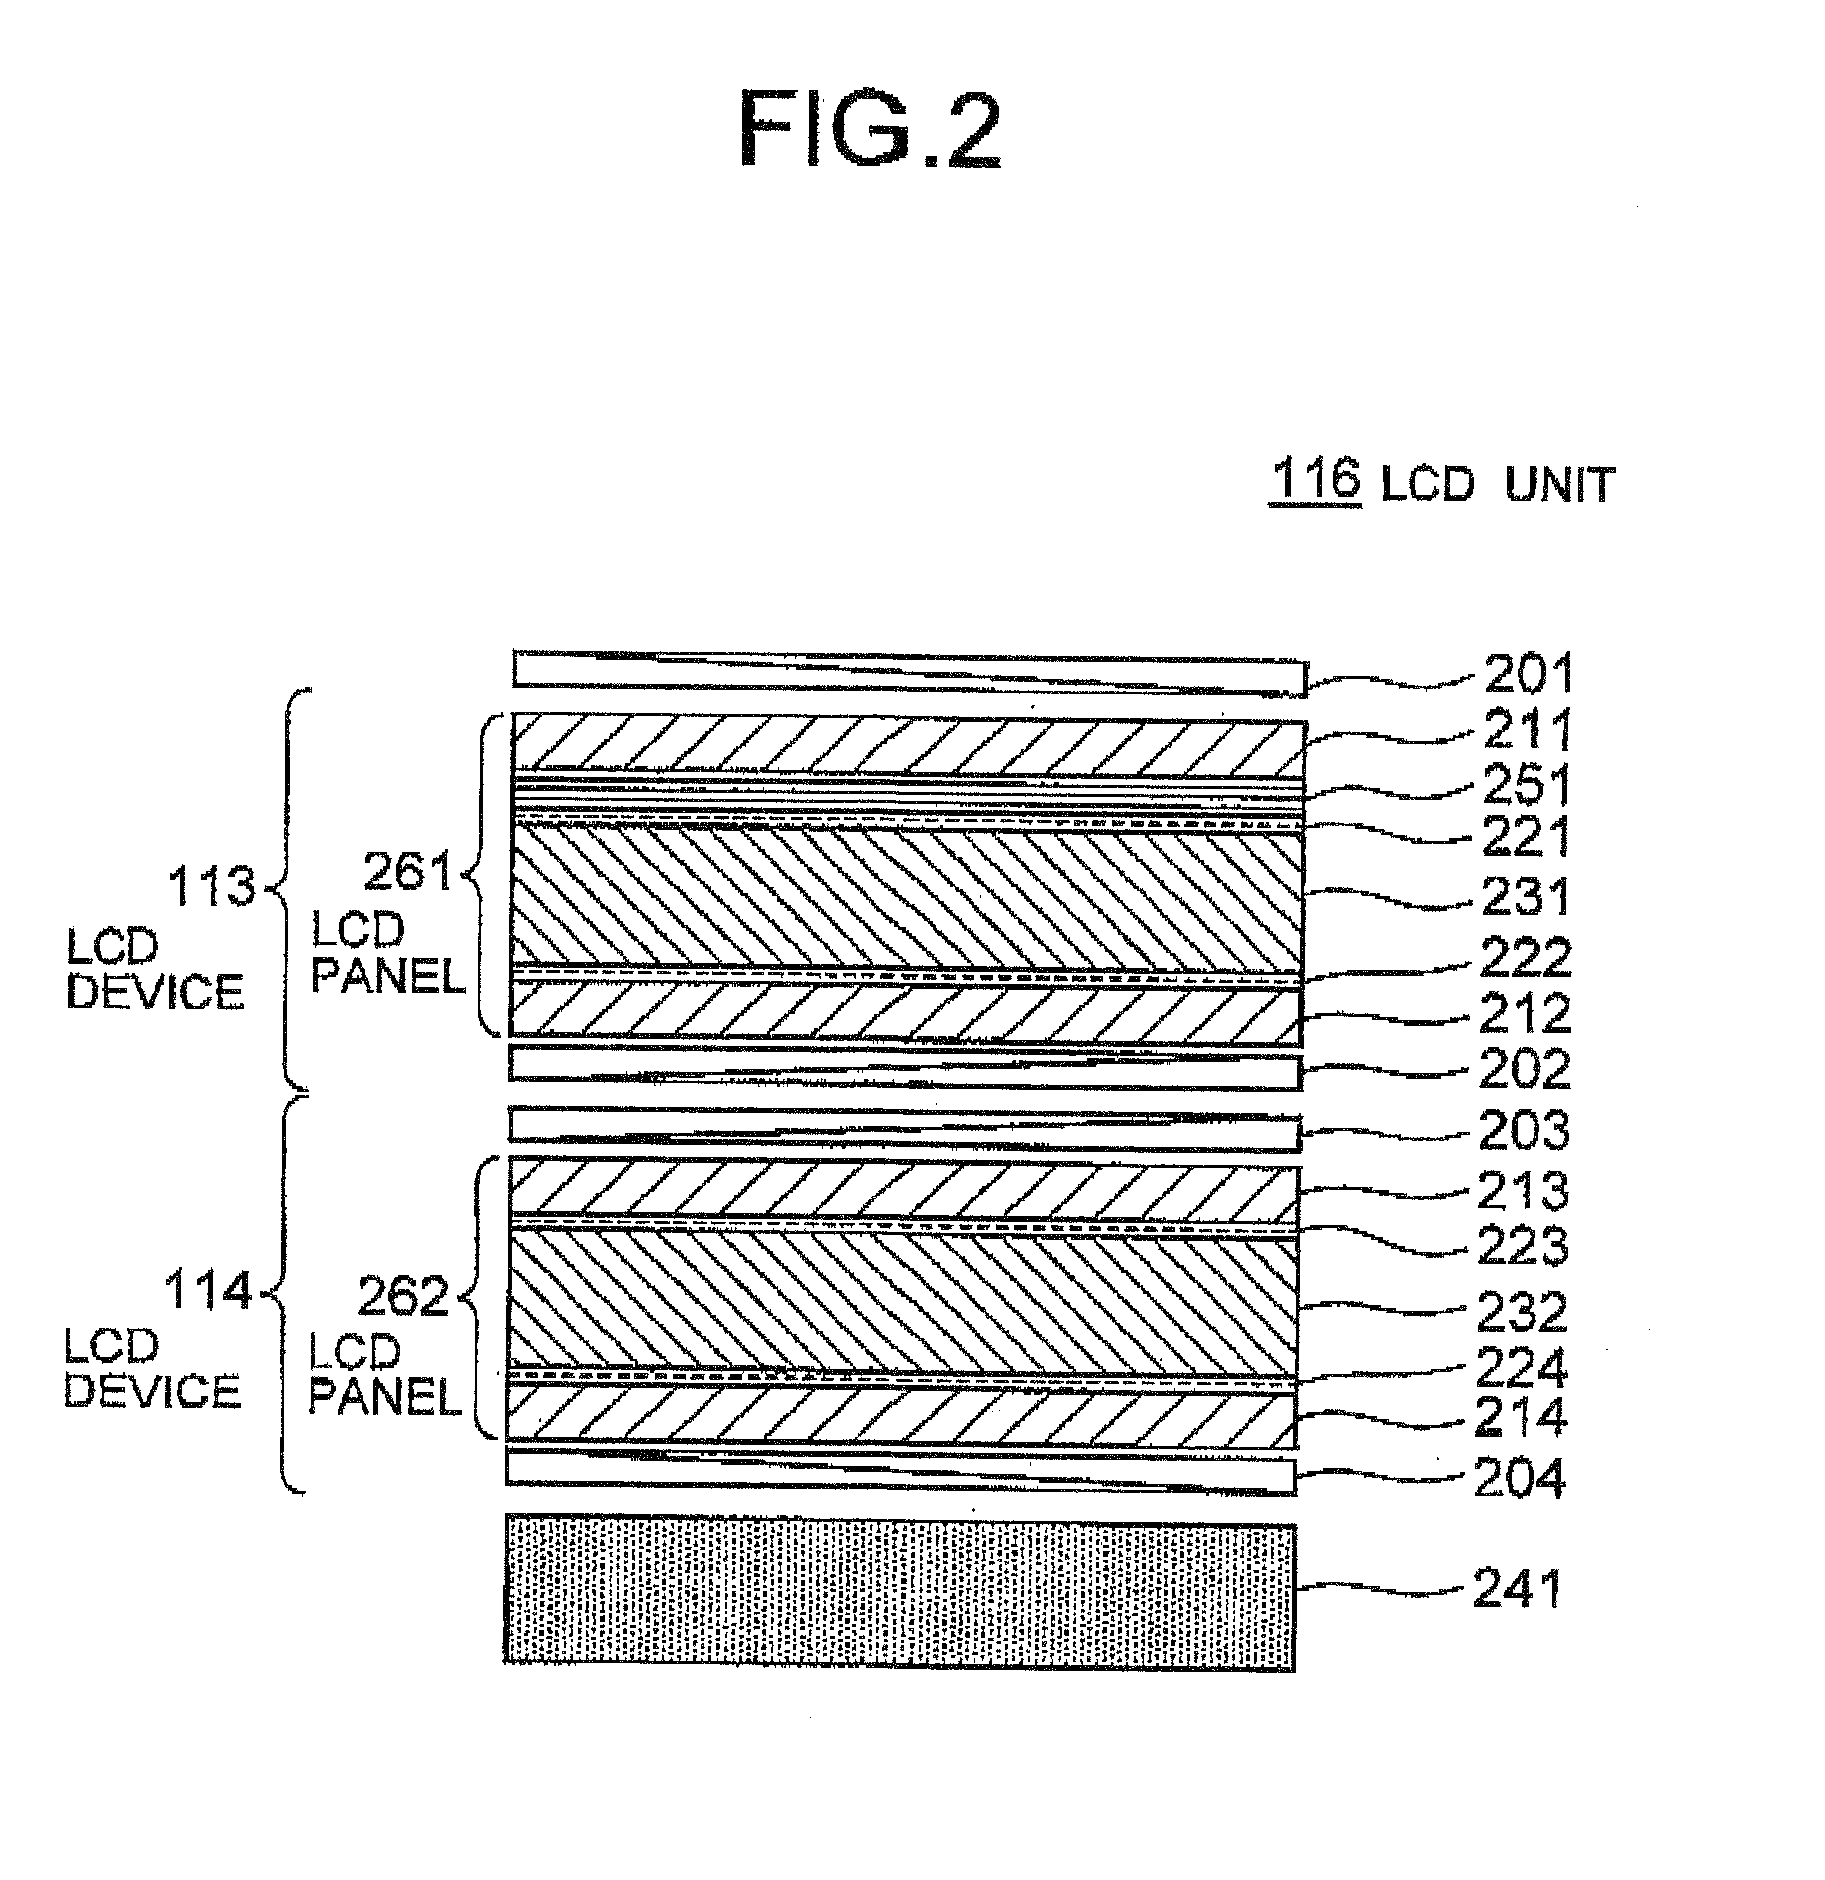 Liquid crystal display unit and system including a plurality of stacked display devices, and drive circuit